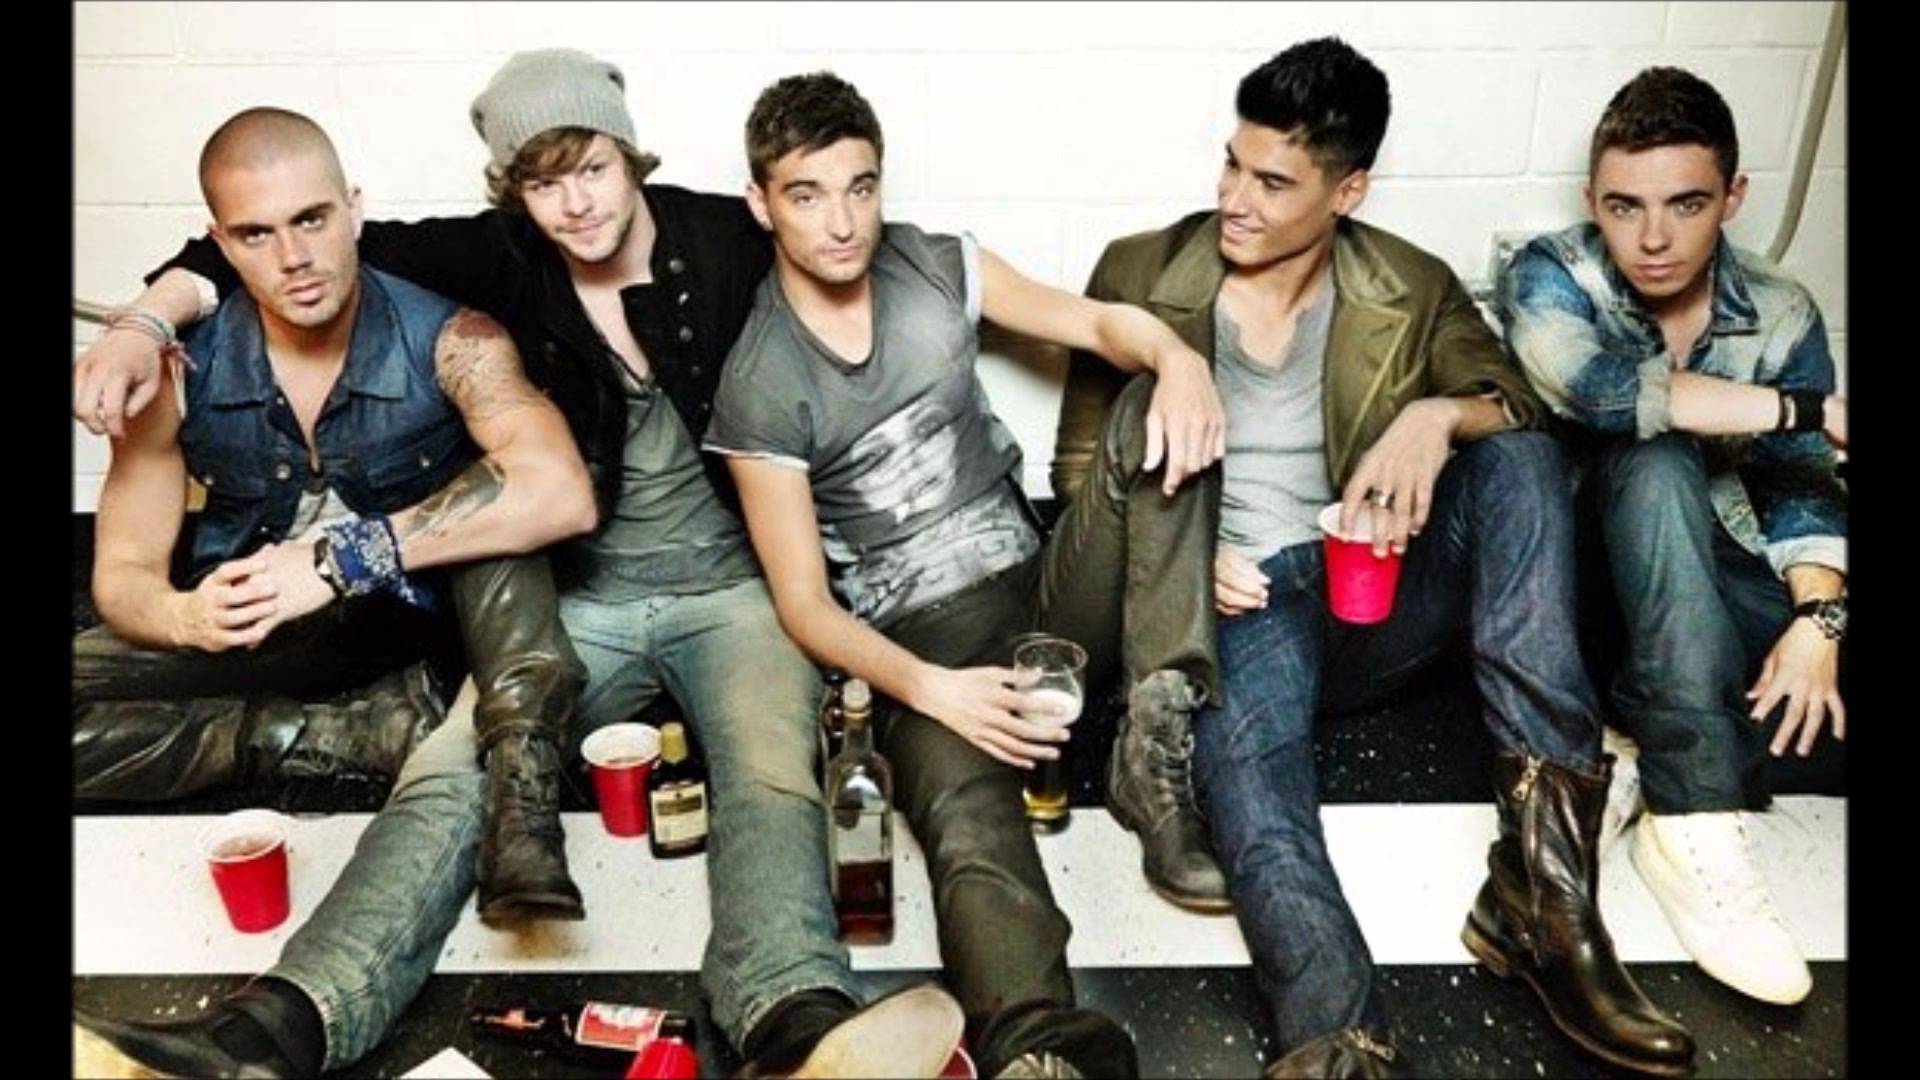 The Wanted On Love (with download link)